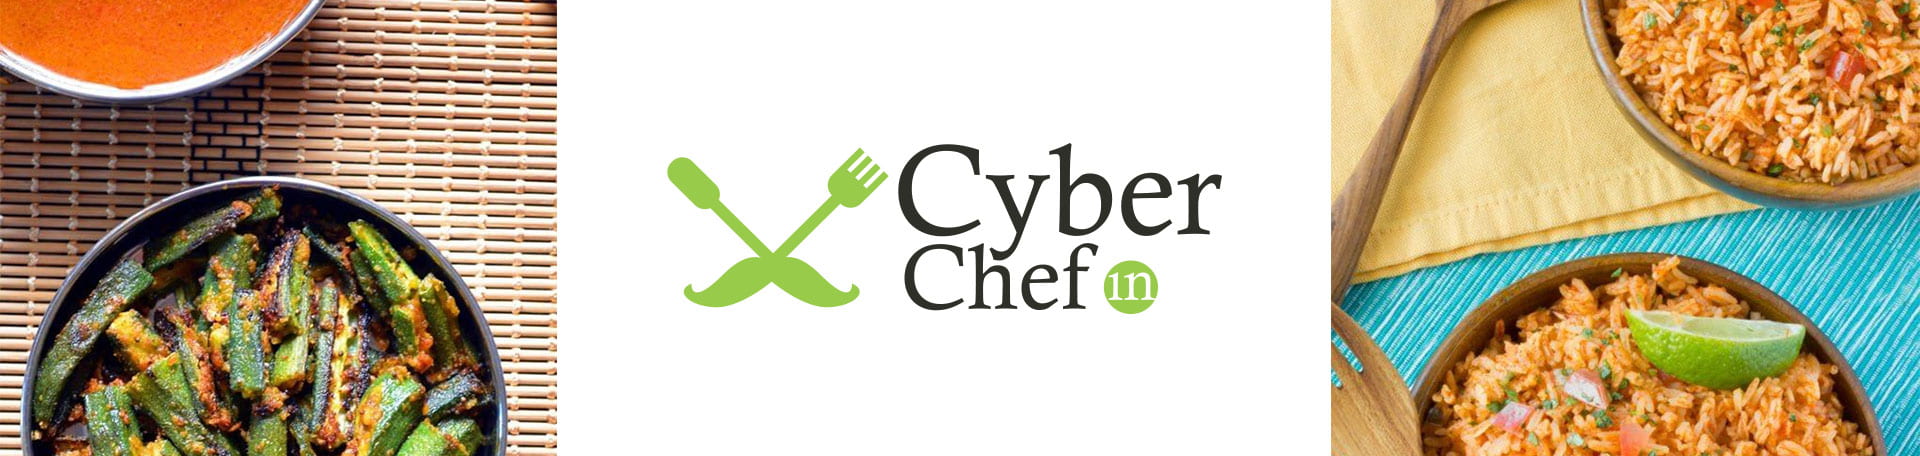 Case Study of CyberChef by a Digital advertising Company